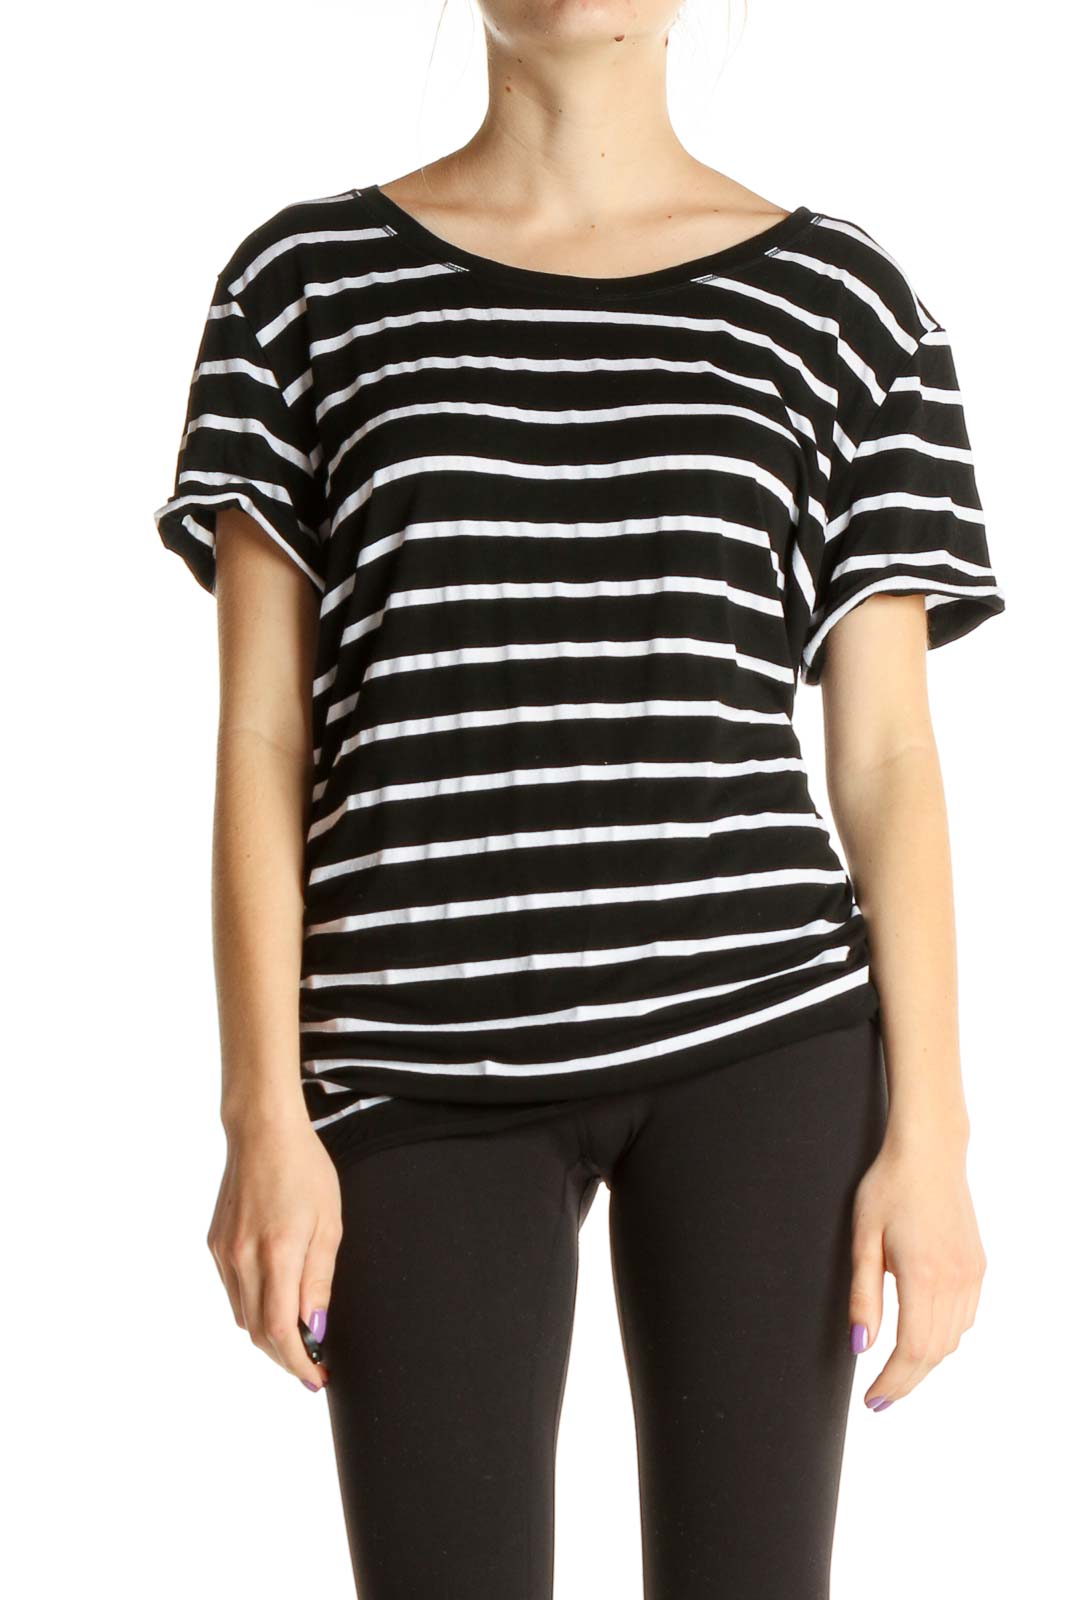 Black Striped All Day Wear T-Shirt Front